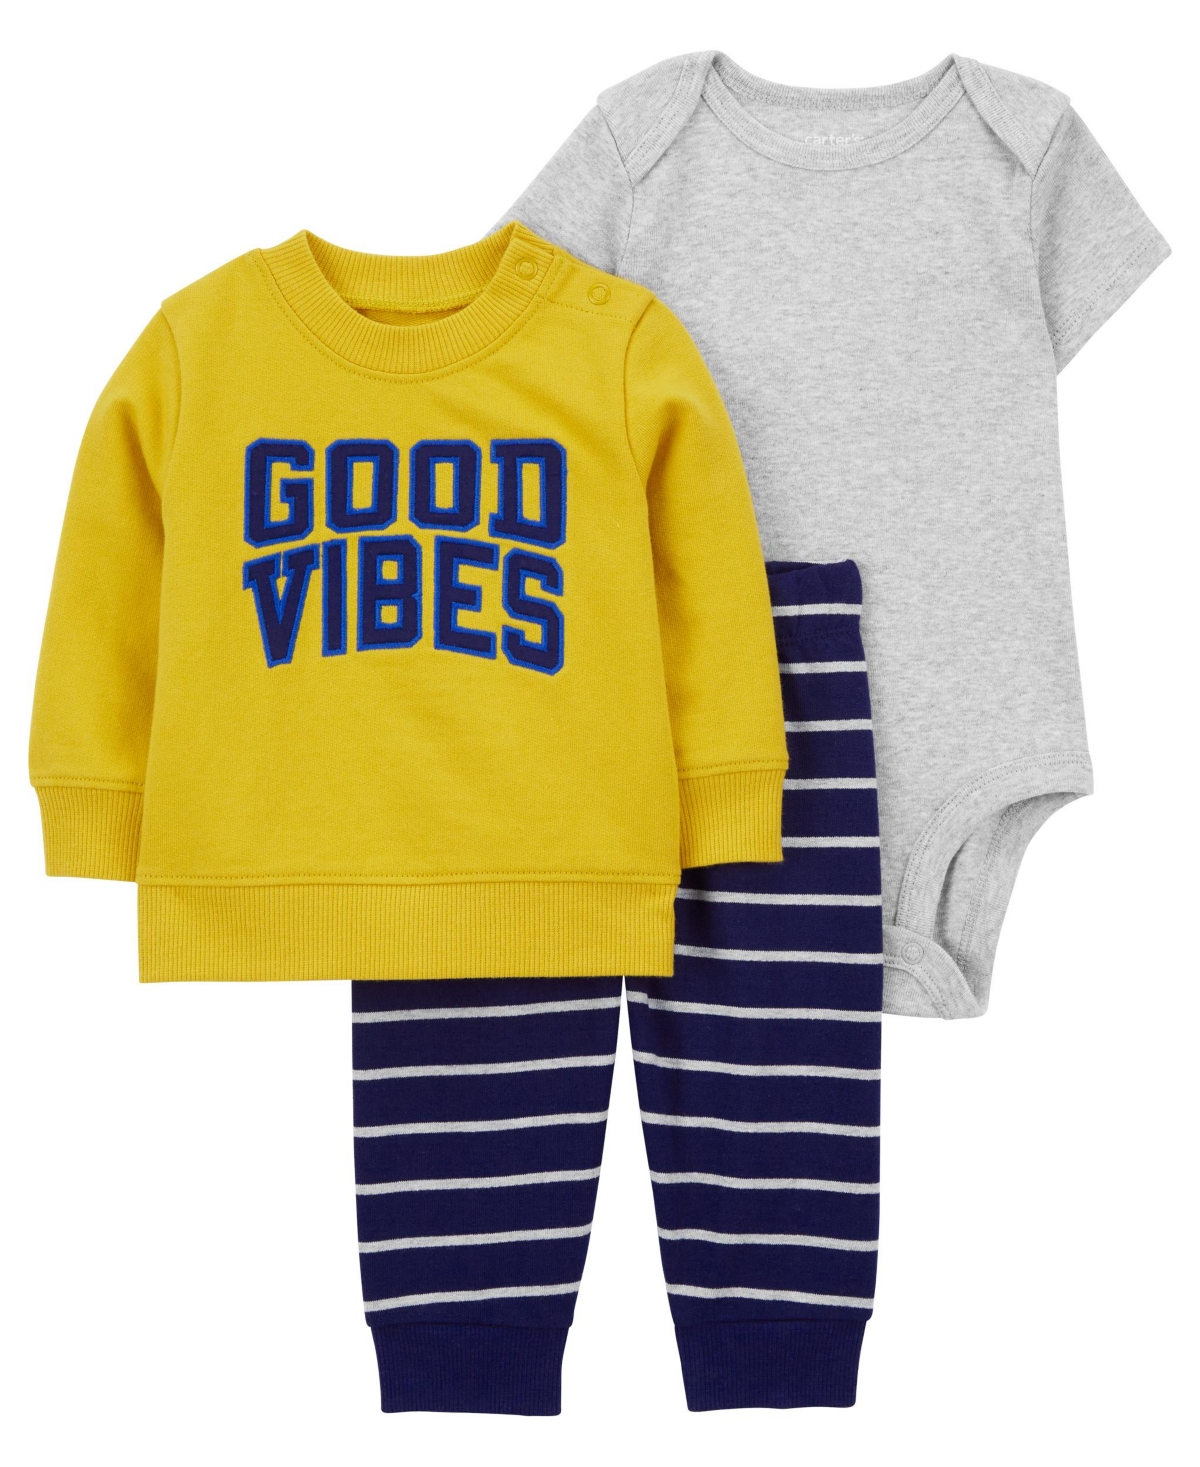 Carter's Baby Boys Good Vibes Little Pullover, Bodysuit And Pants, 3 Piece Set In Yellow